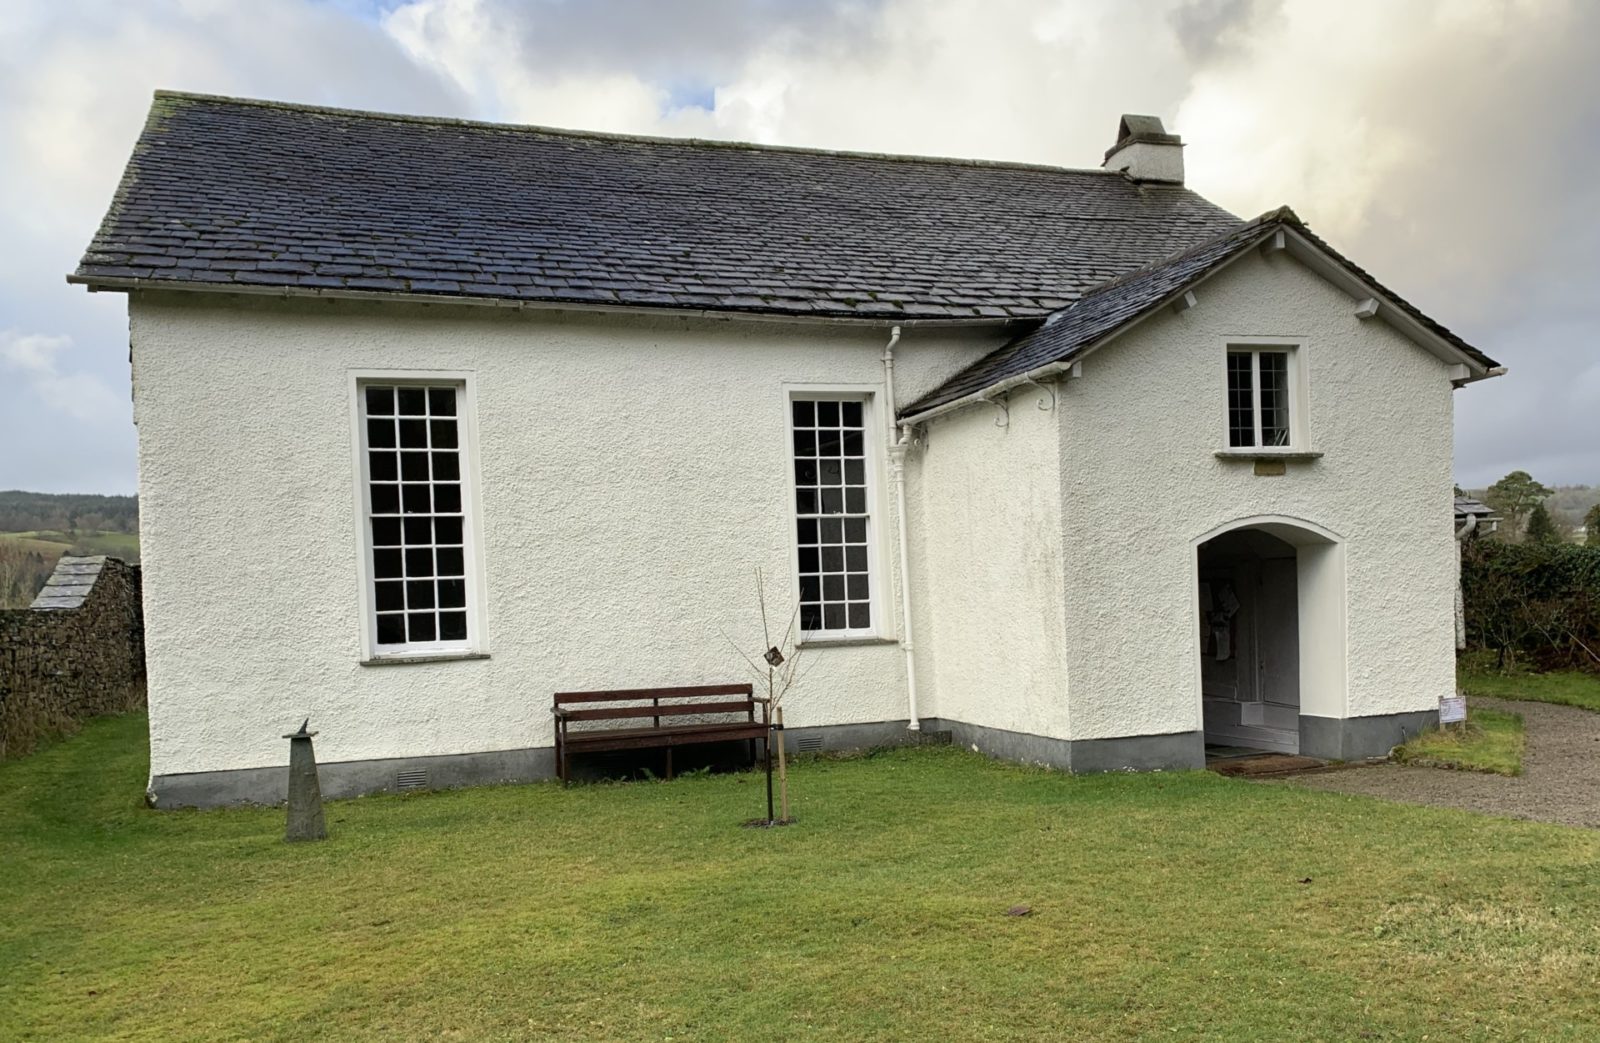 Colthouse Quaker Meeting House